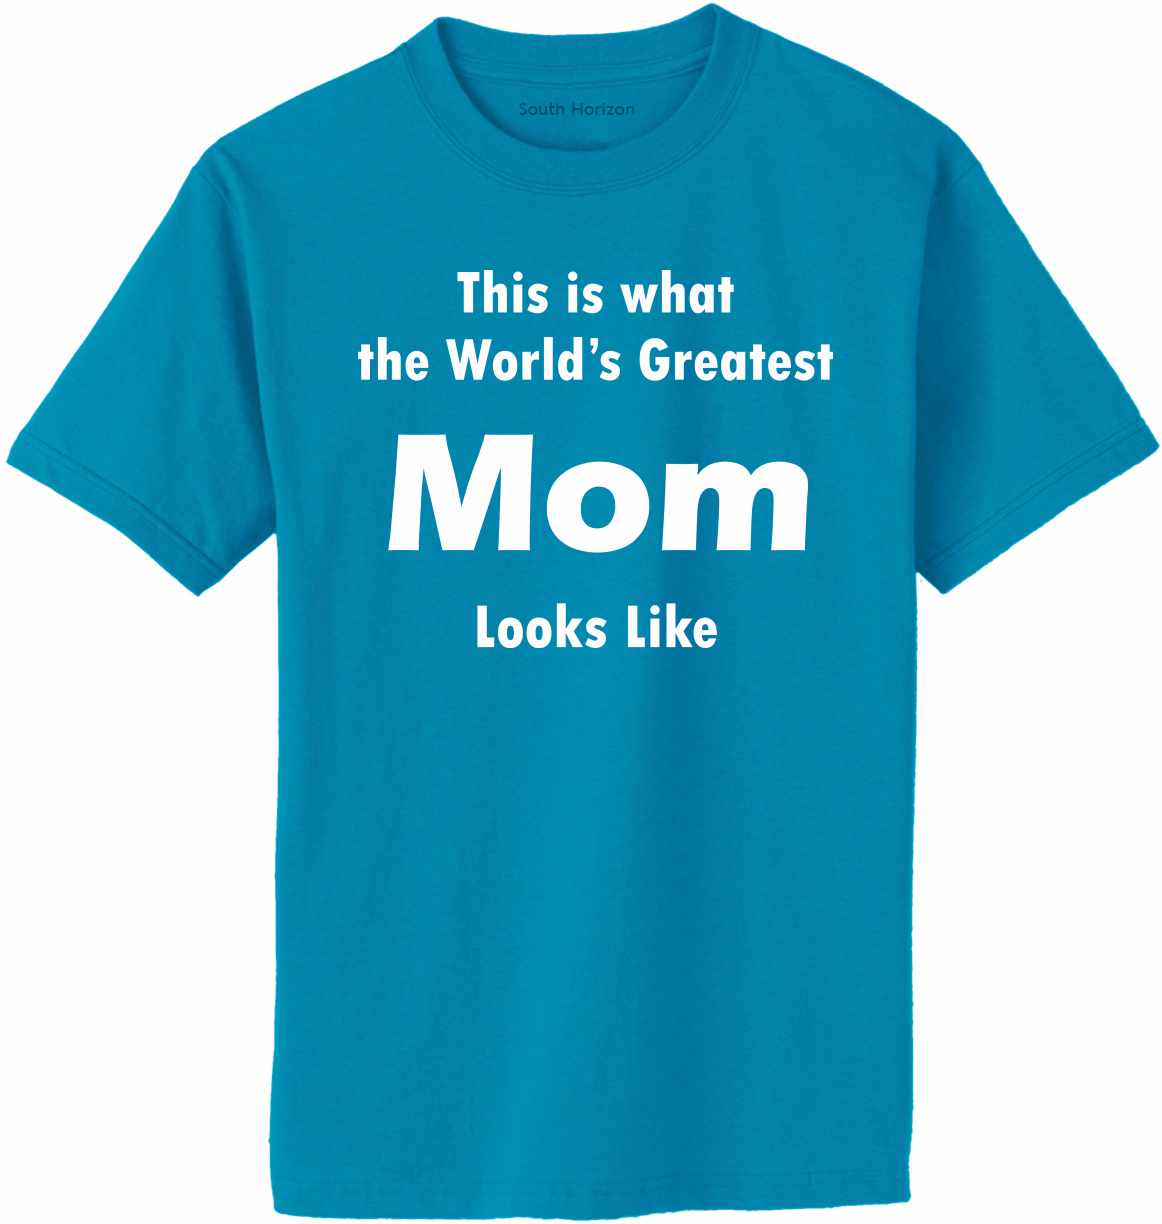 This is what the World's Greatest Mom Looks Like Adult T-Shirt (#762-1)